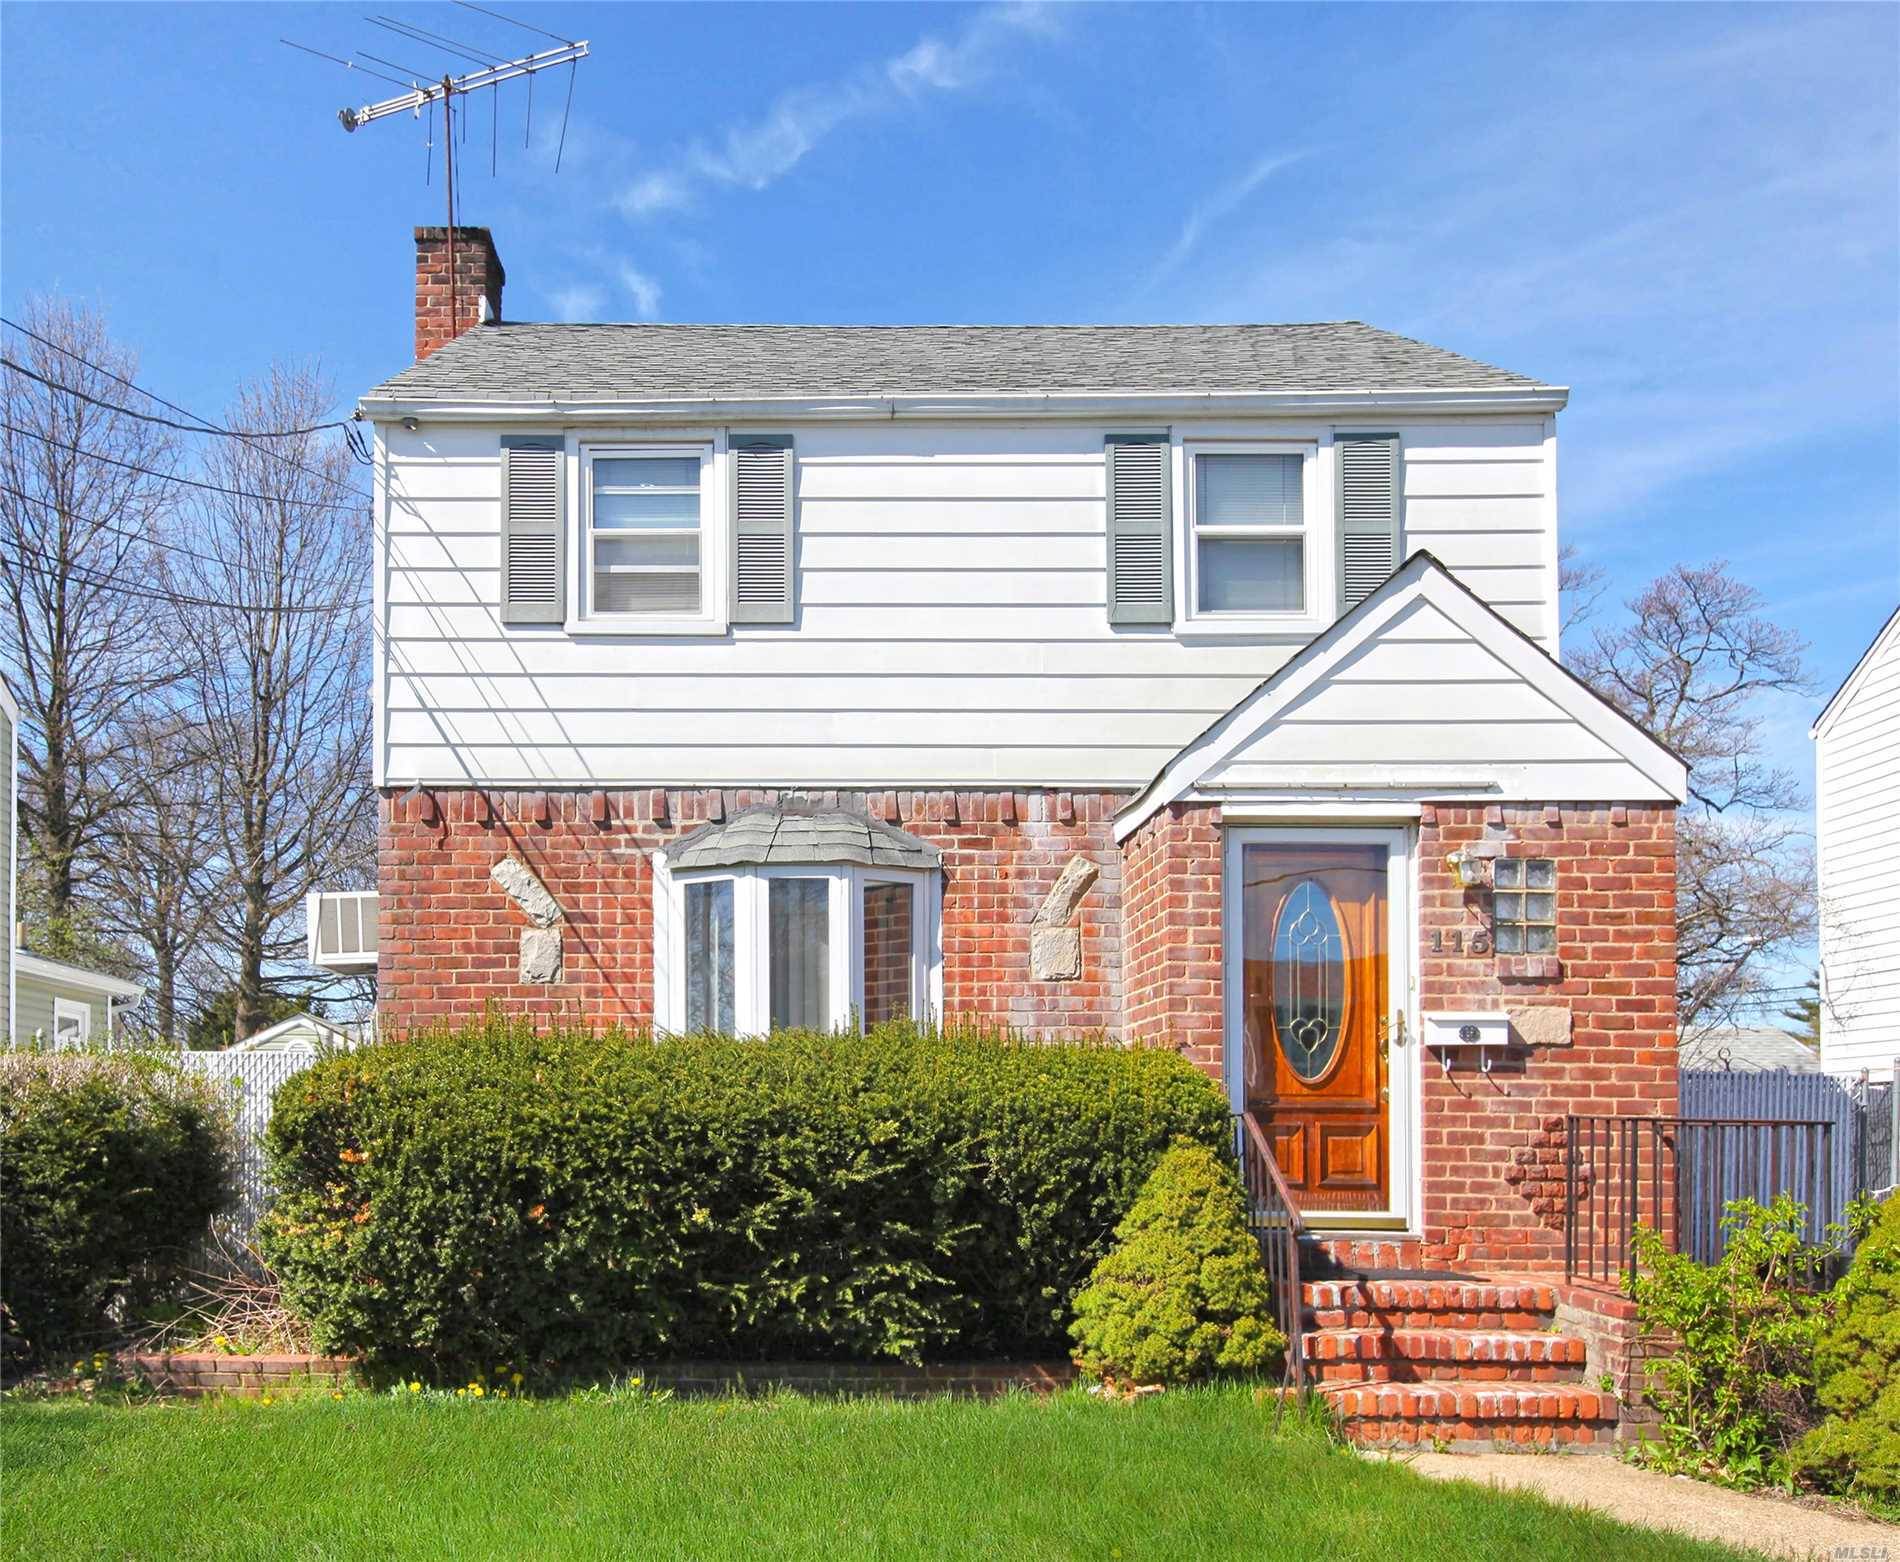 This Gorgeous One Family Colonial Home In The Heart Of Hempstead, Features Three Bedrooms With Lots Of Closet Space, Two Full Bathrooms, Formal Dining Room, Spacious Living Area, Modern Kitchen, ...